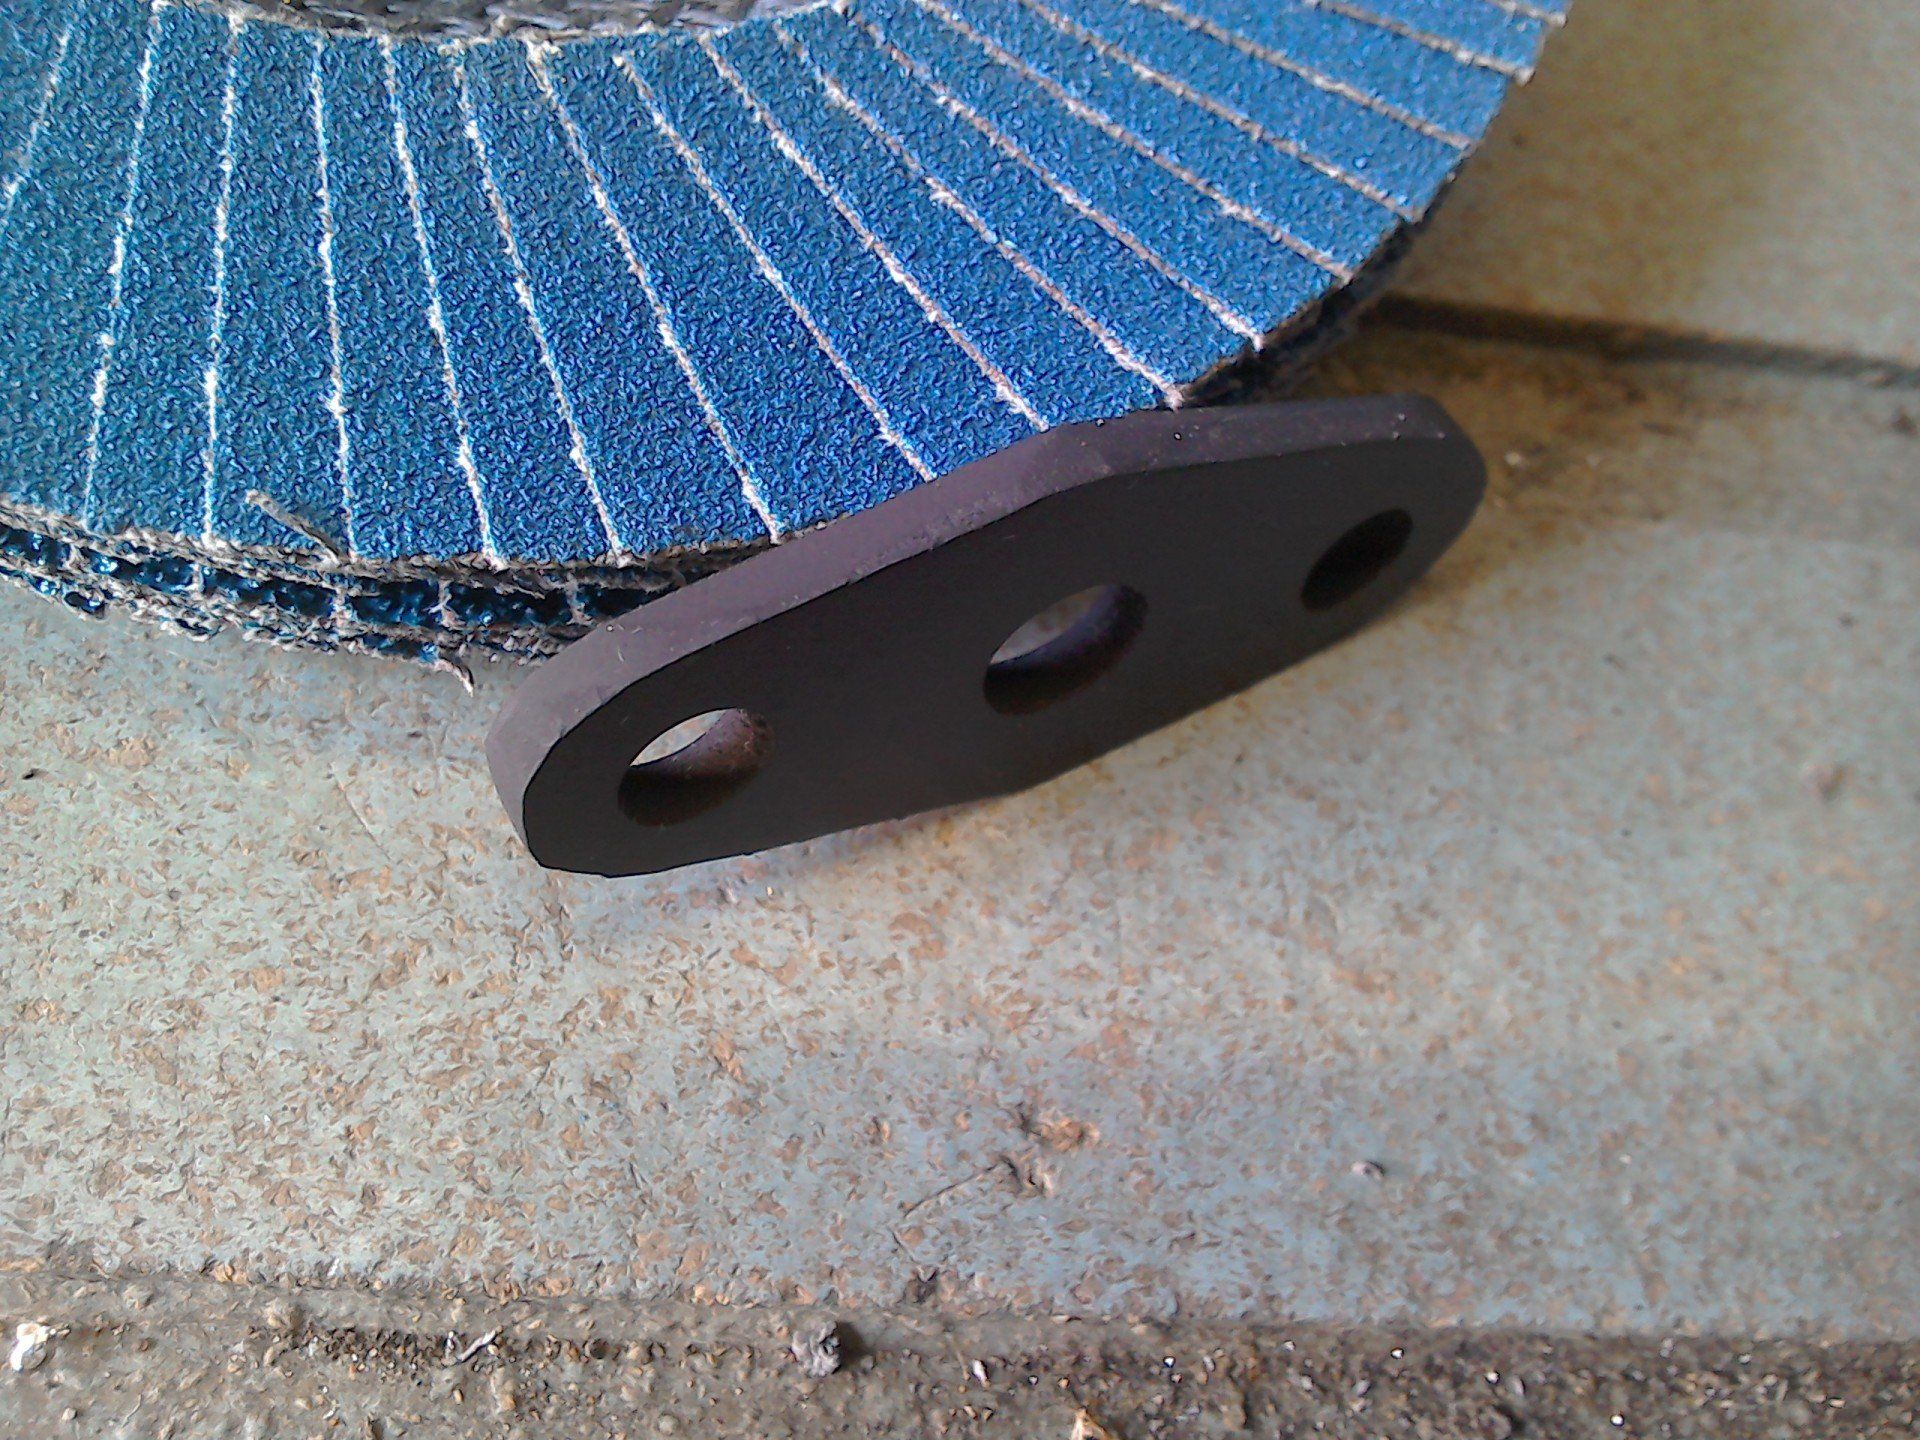 Viton gasket, edges trimmed by flap disc.